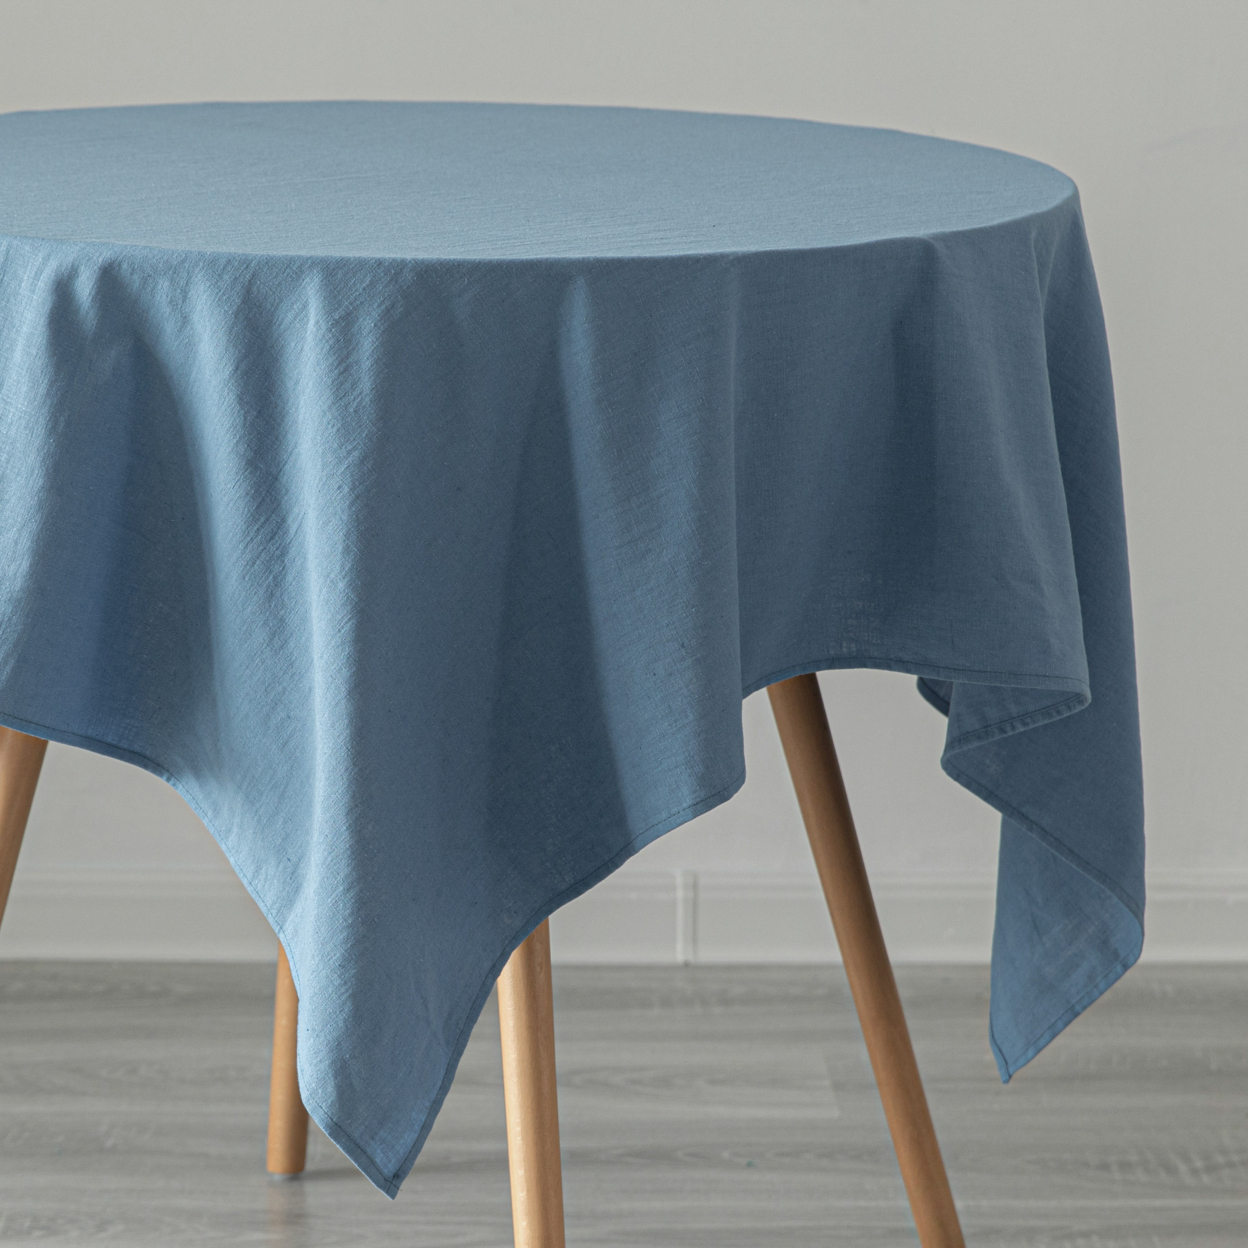 Deerlux 100 Percent Pure Linen Washable Tablecloth Solid Color - 52 X 70 In. Gray